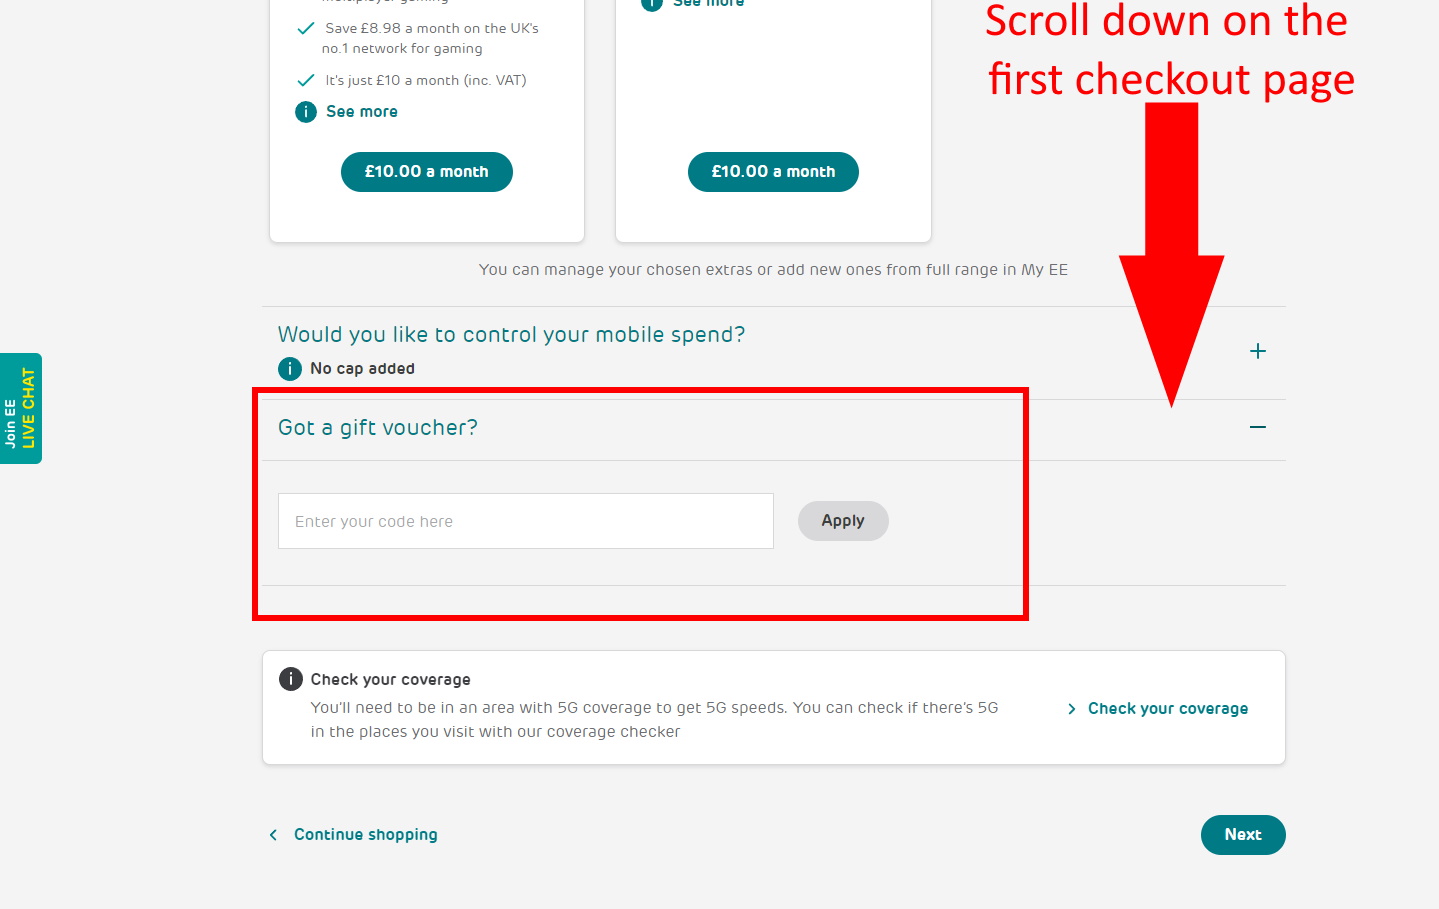 ee mobile discount scroll to bottom of page and enter code